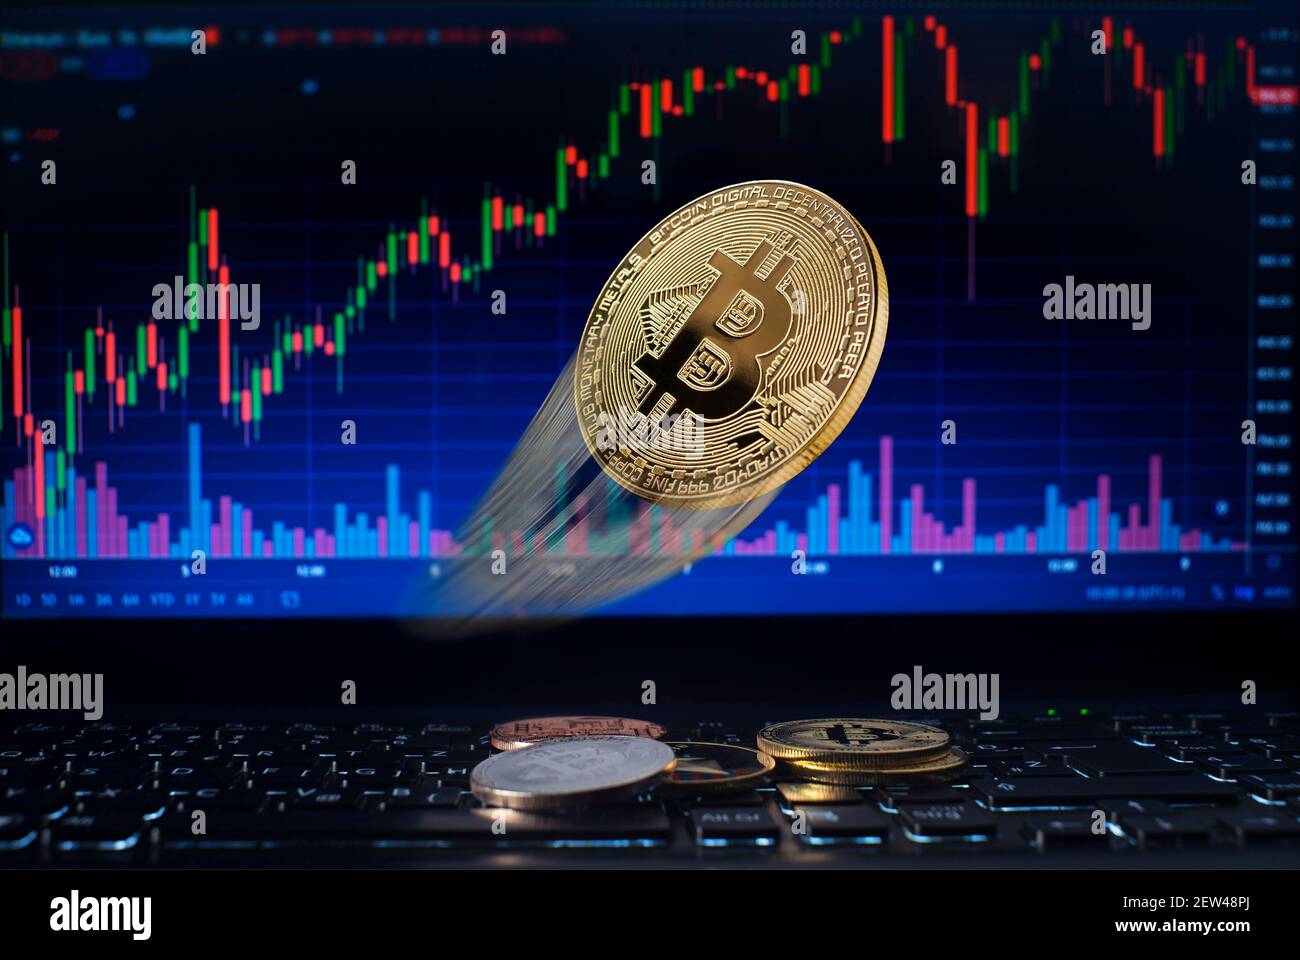 Golden bitcoin flying whit computer trading chart background. Bitcoin and altcoin the most important cryptocurrency concept Stock Photo